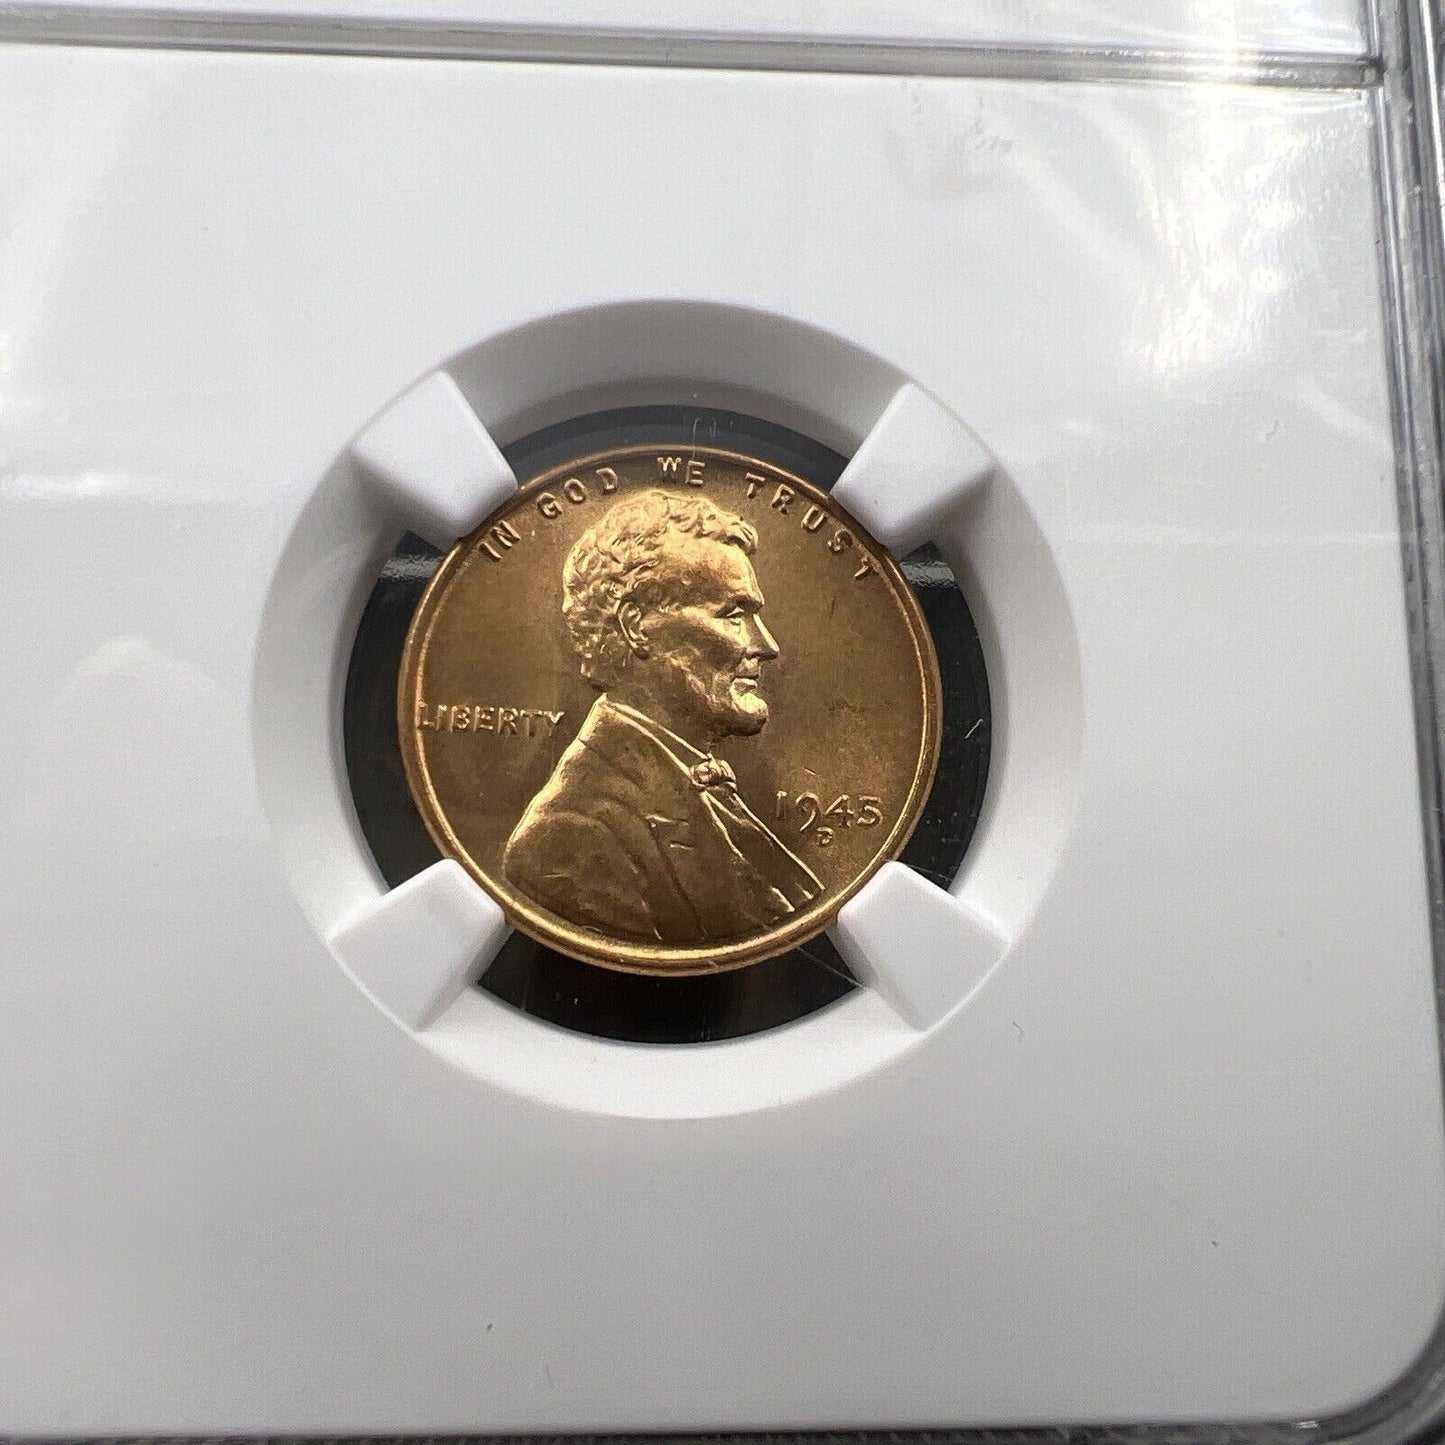 1945 D 1c Lincoln Wheat Cent Penny Coin MS66 RD NGC Gem BU